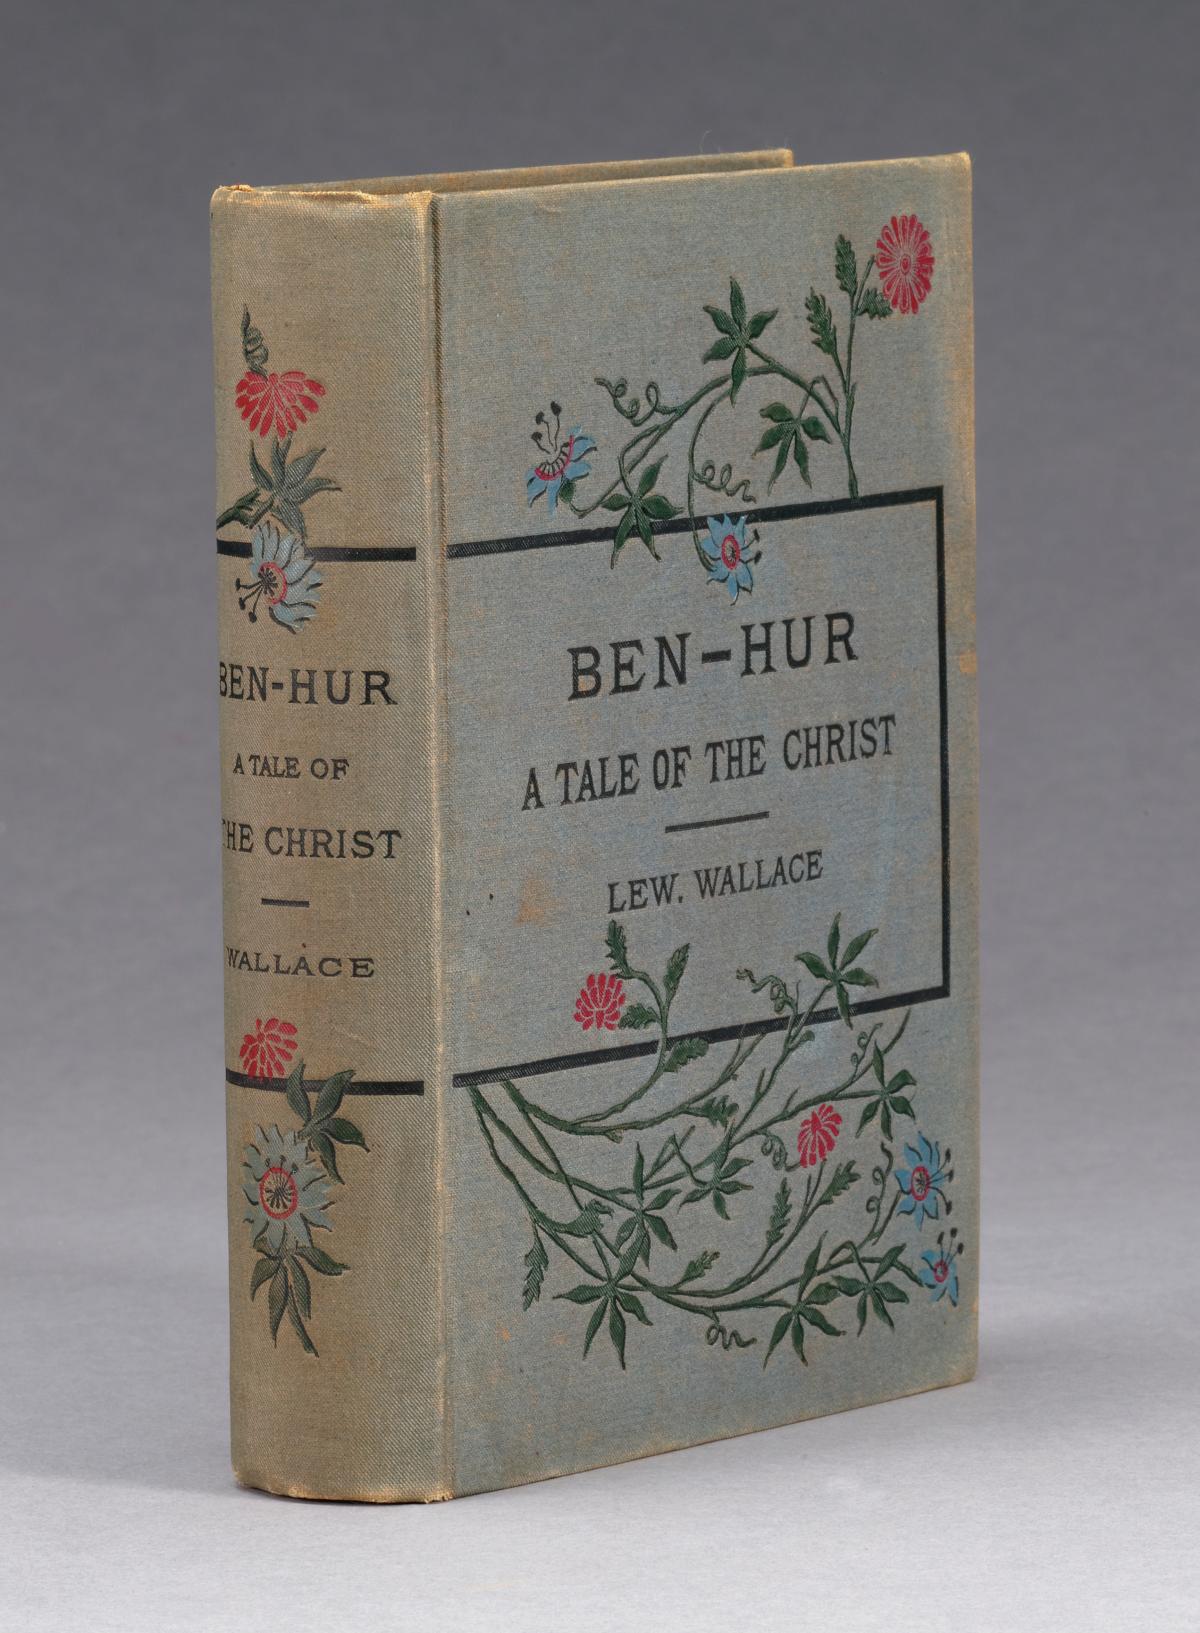 Cream colored cover and spine, decorated with twining vines and flowers, which border the title and author text